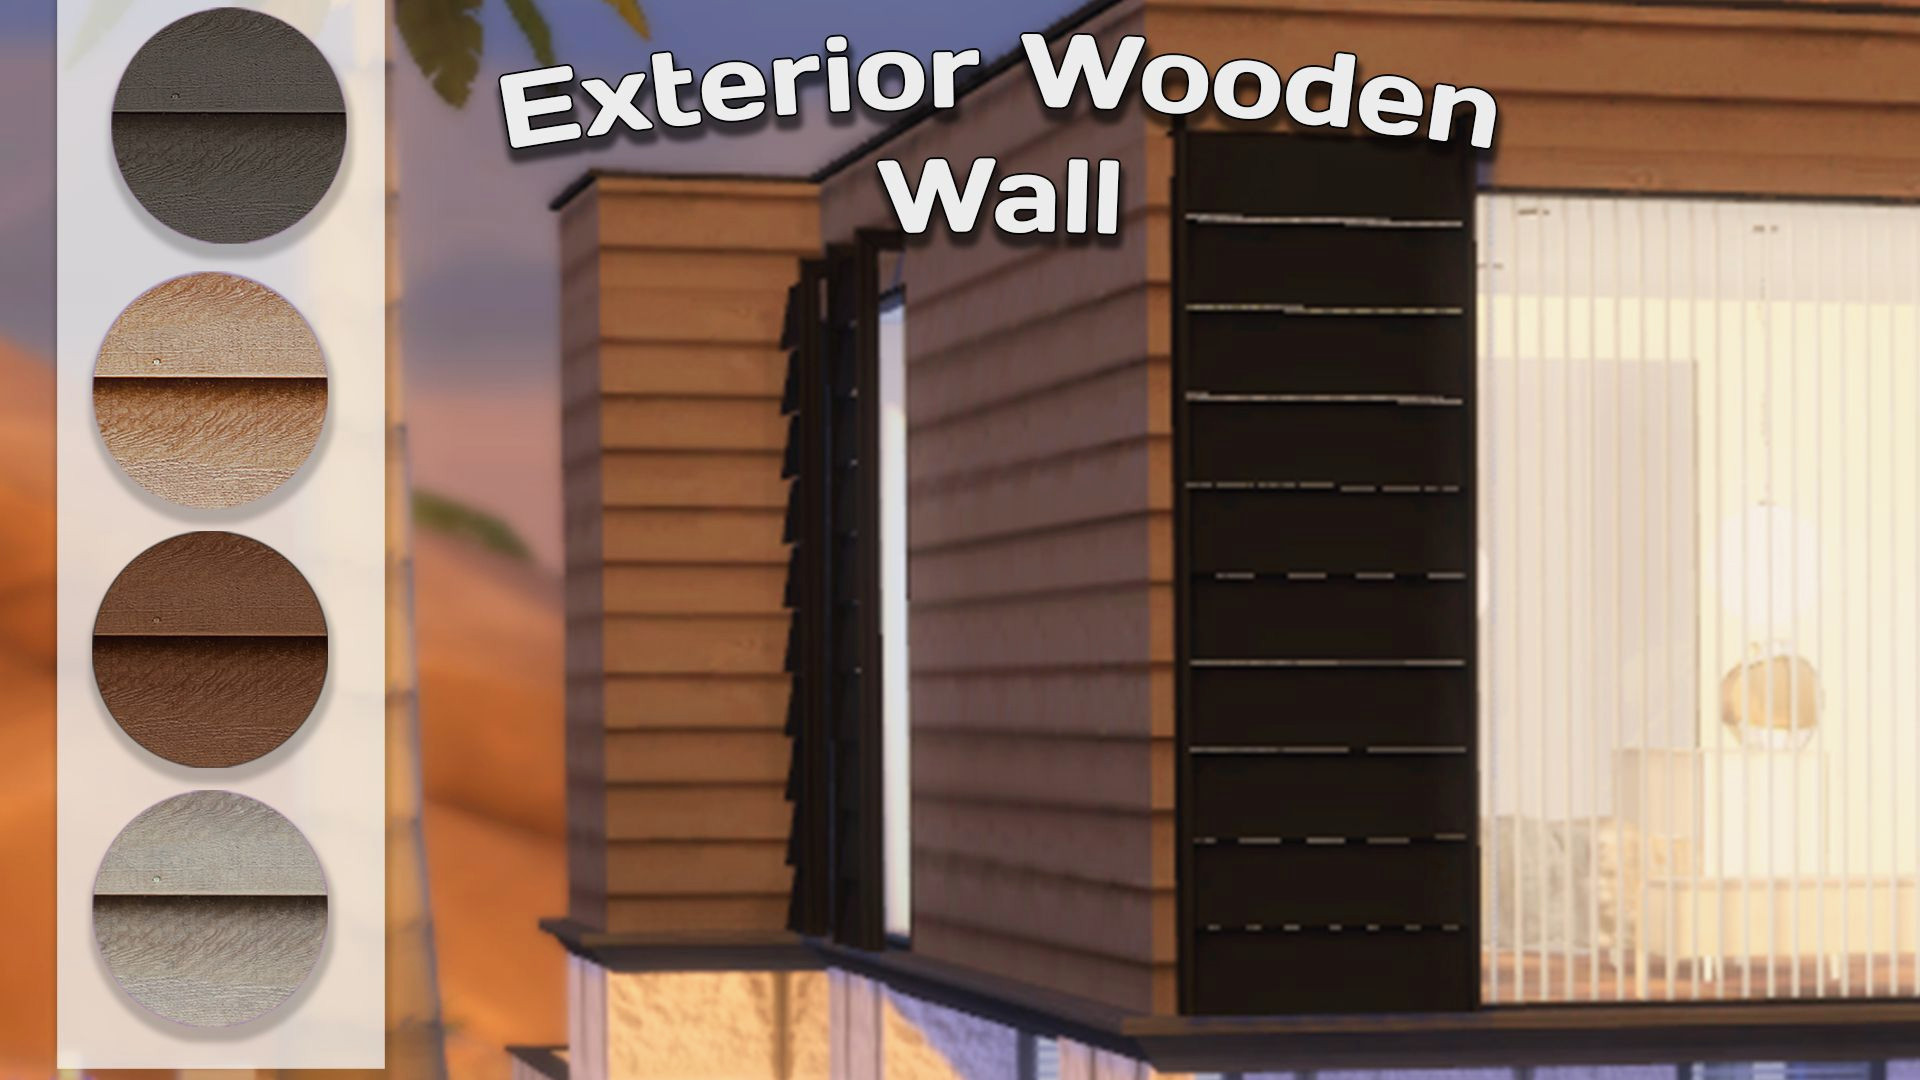 1920x1080 Sims 4 Cc Houses Tumblr Lovely Wooden Exterior Wall for Sims 4 S4cc